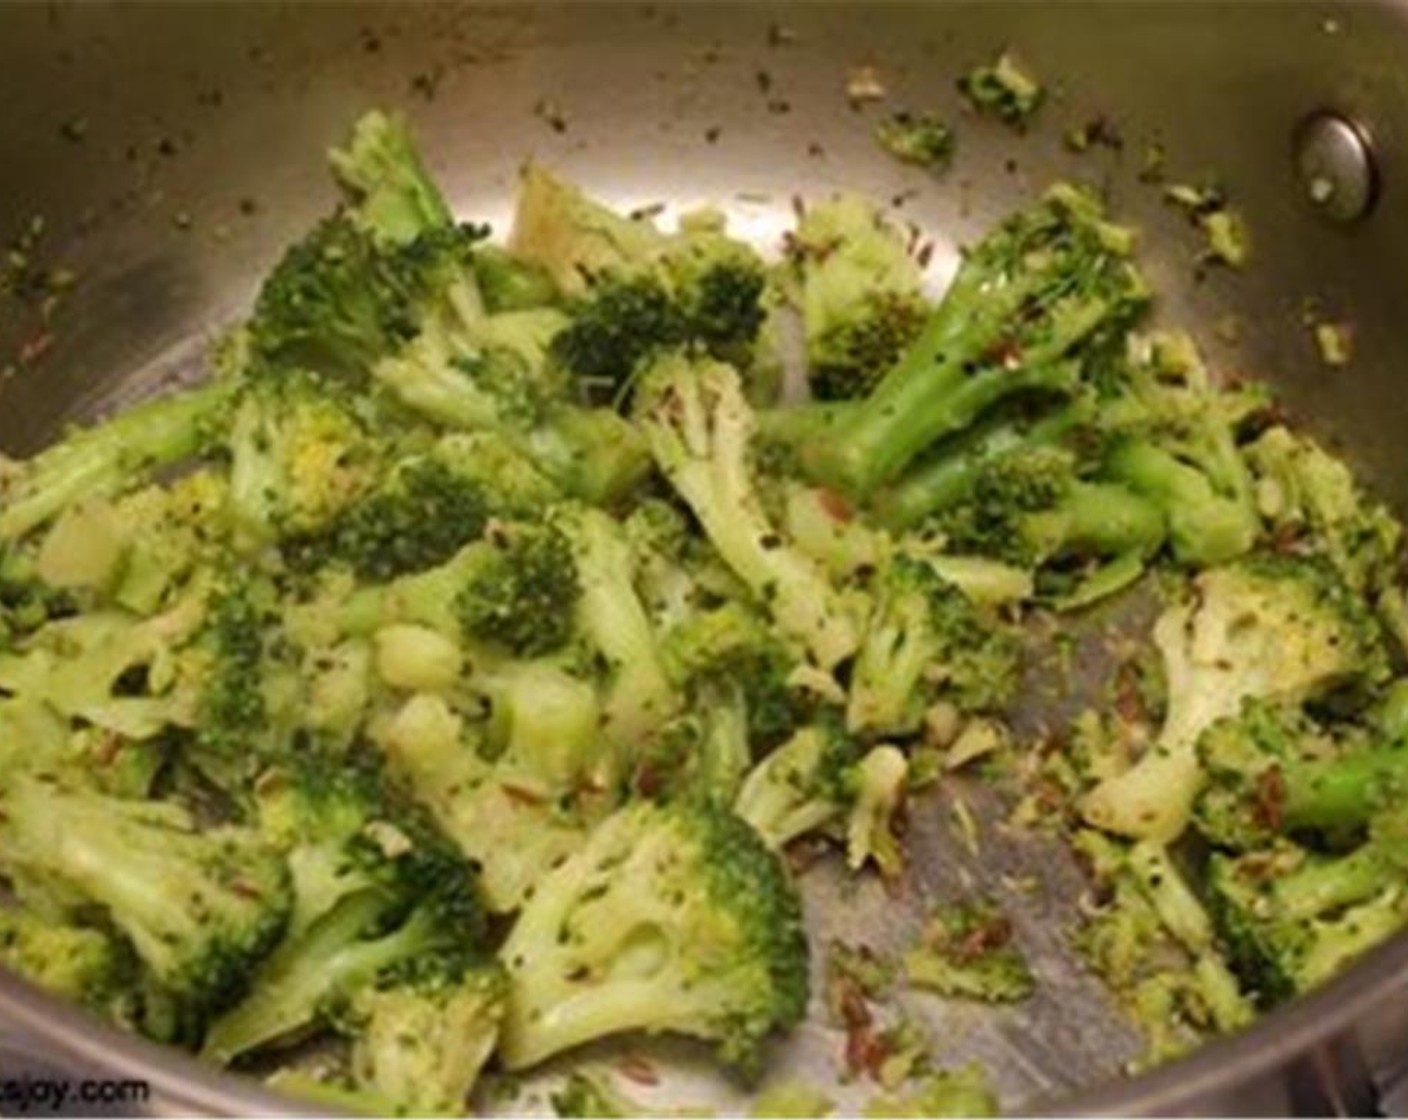 step 7 Heat Olive Oil (1 tsp) and add Cumin Seeds (1/2 tsp). Add Broccoli Florets (2 cups) and Soy Sauce (1 tsp) and cook until broccoli is tender. Taste and season with Salt (to taste).